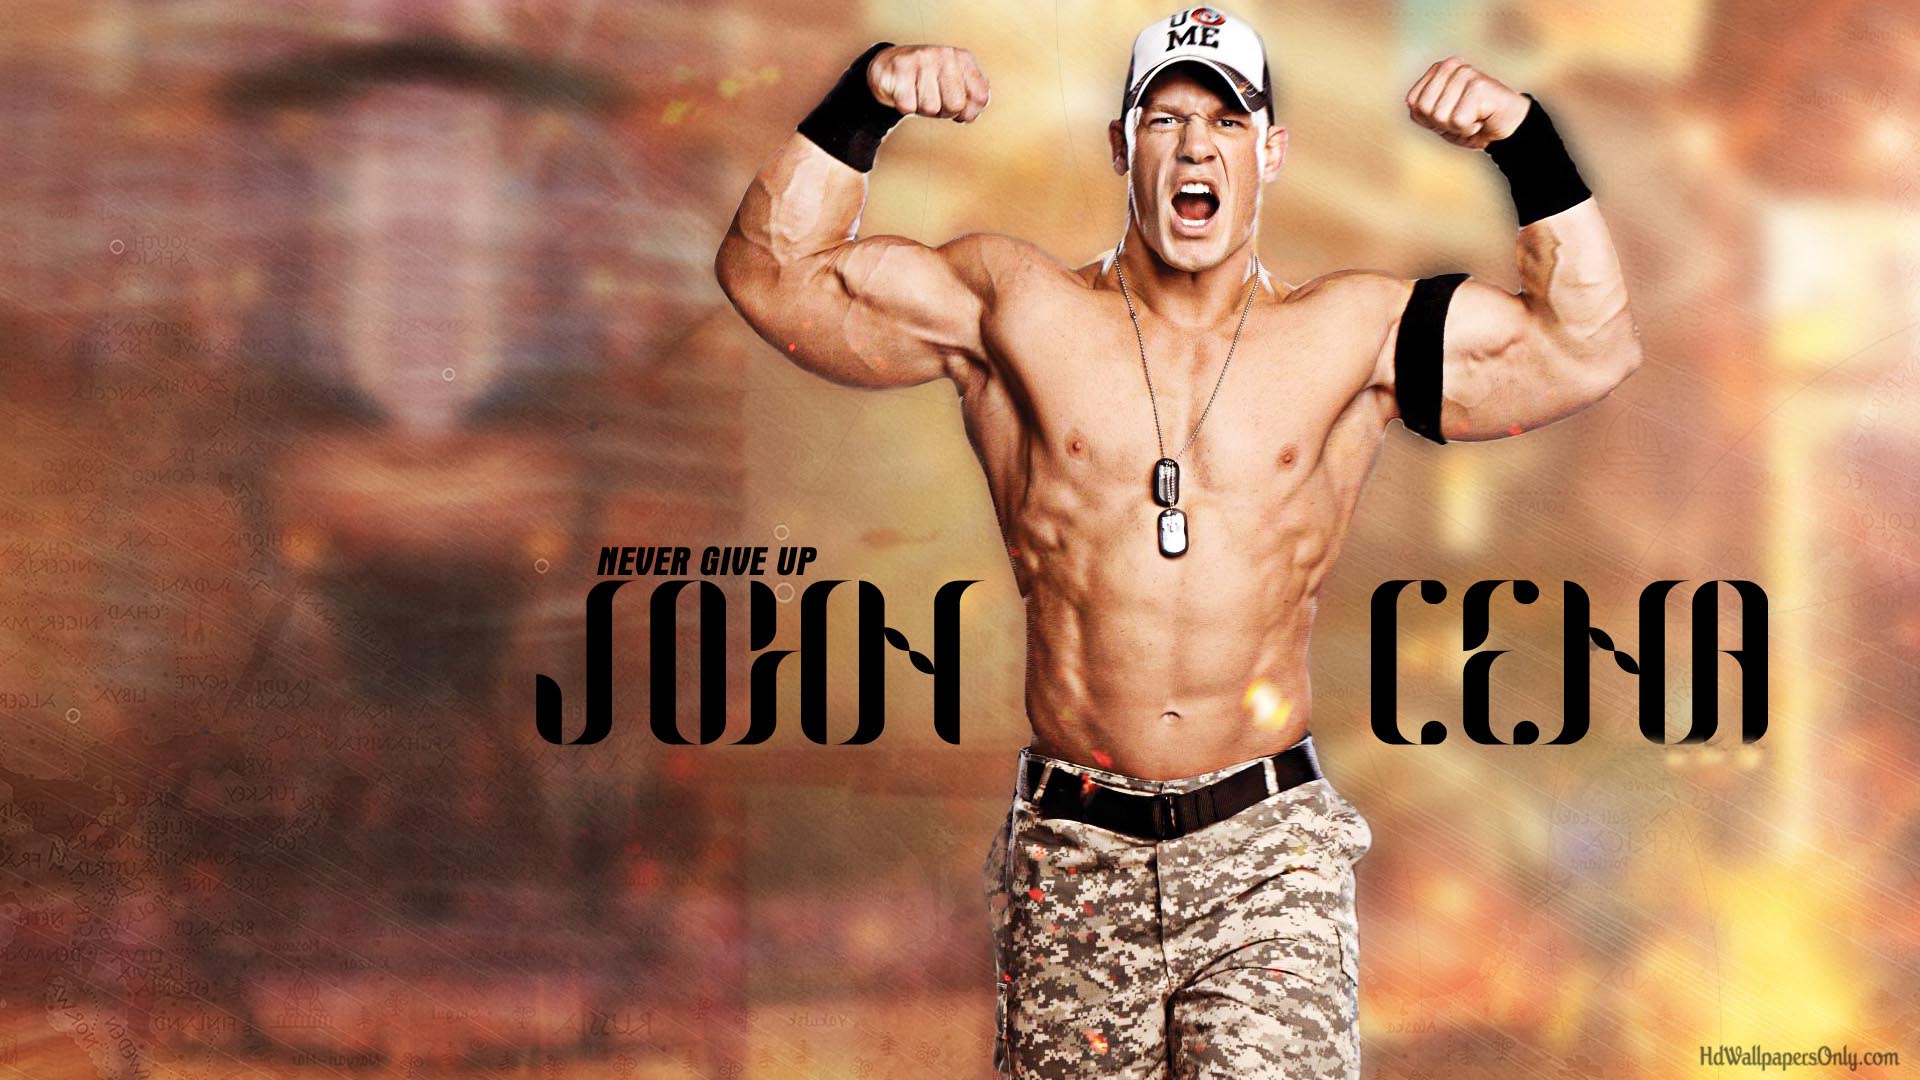 john cena pictures 2014. Don't forget to like our Facebook fan page for the latest updates of hd wallpapers only.